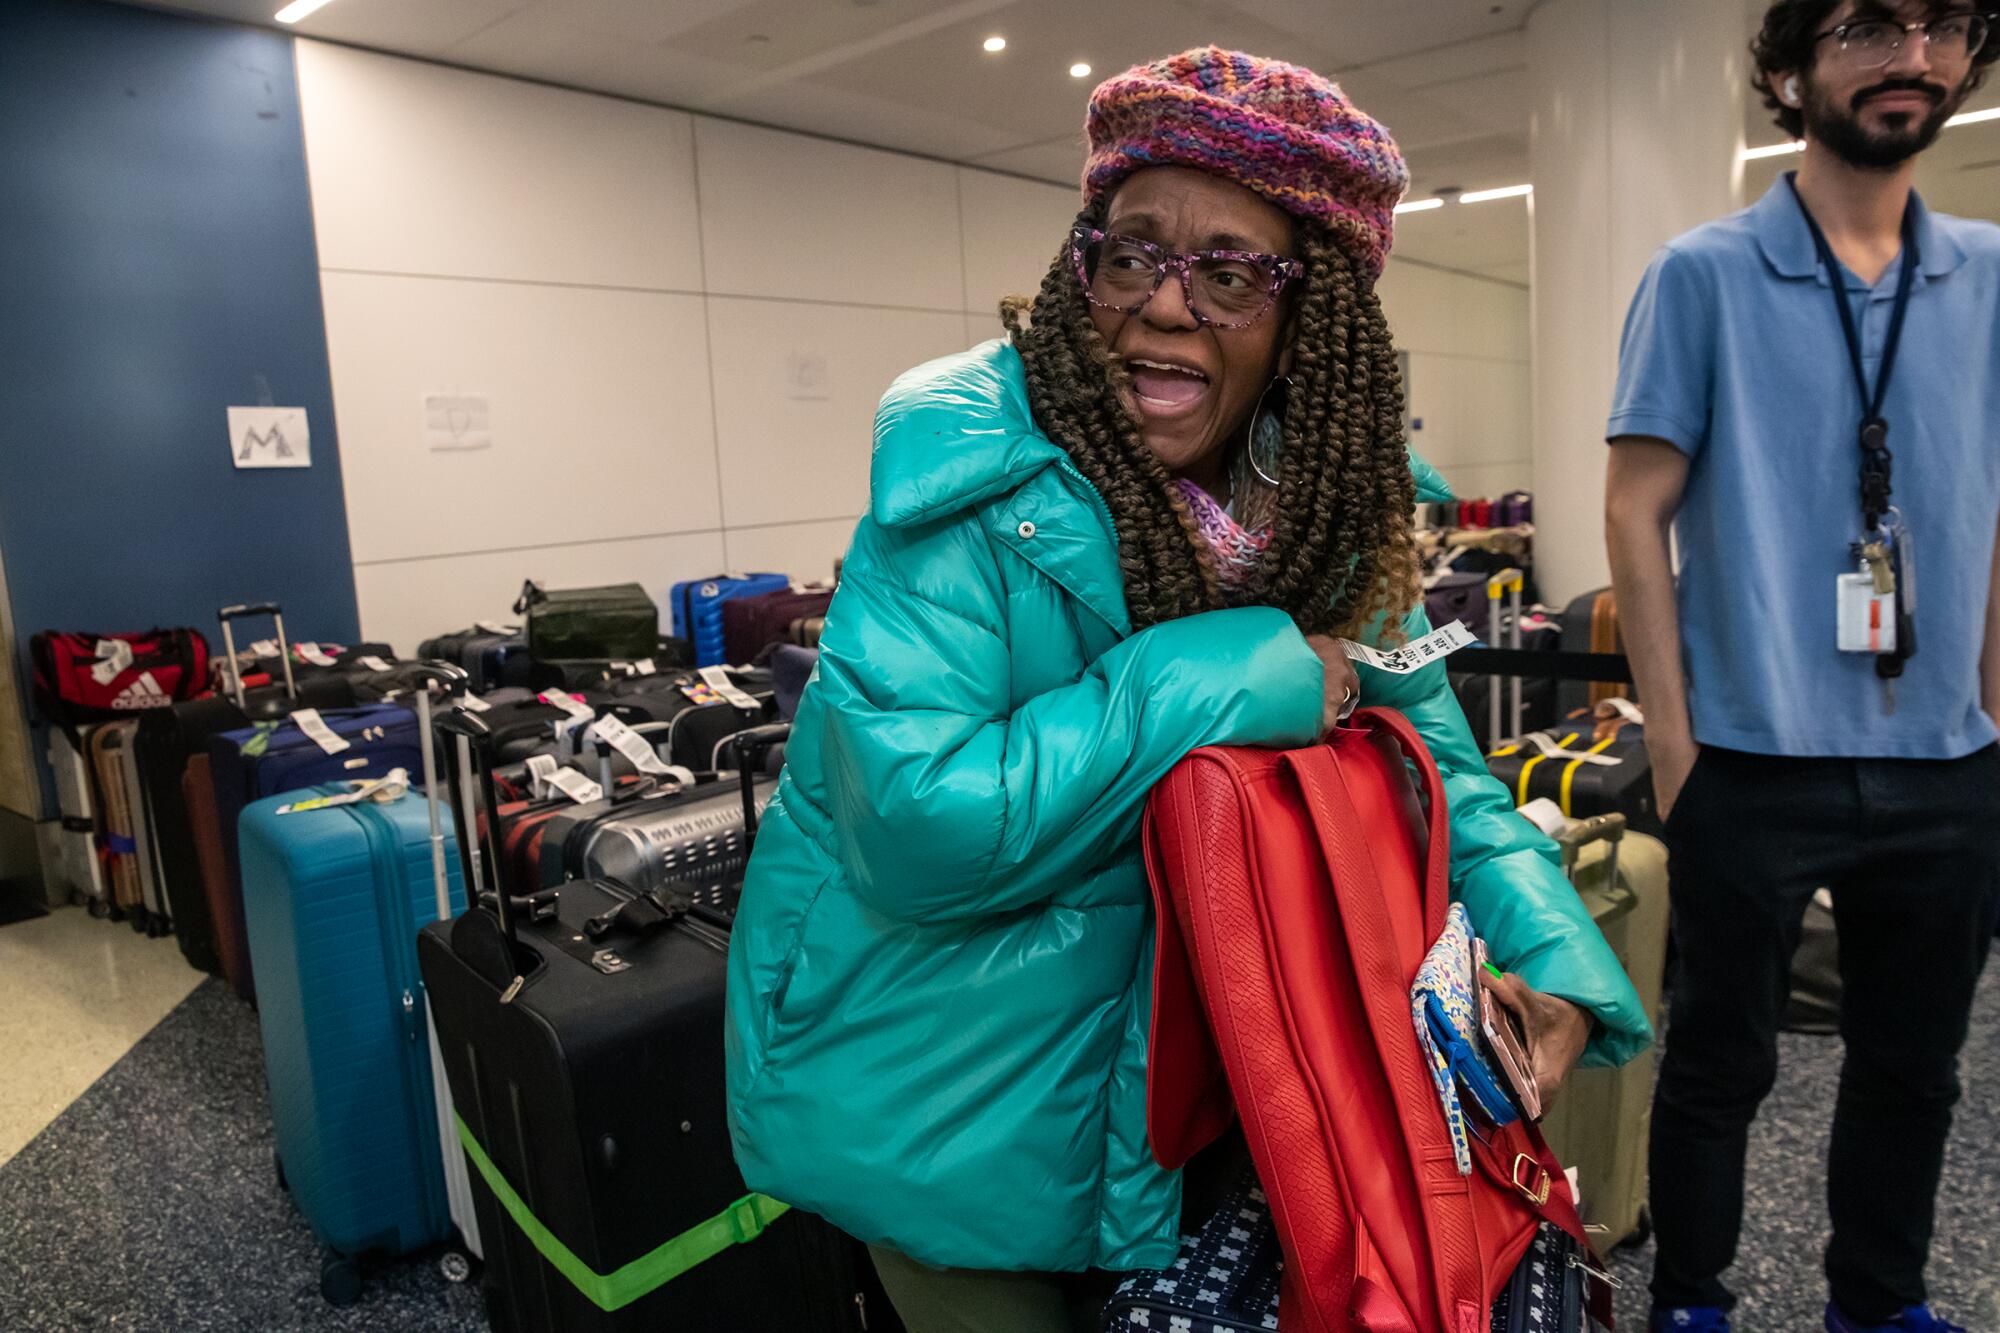 Theresa Matthews, 61, is happy to locate her backpack carrying her laptop that has her doctorate work papers. 